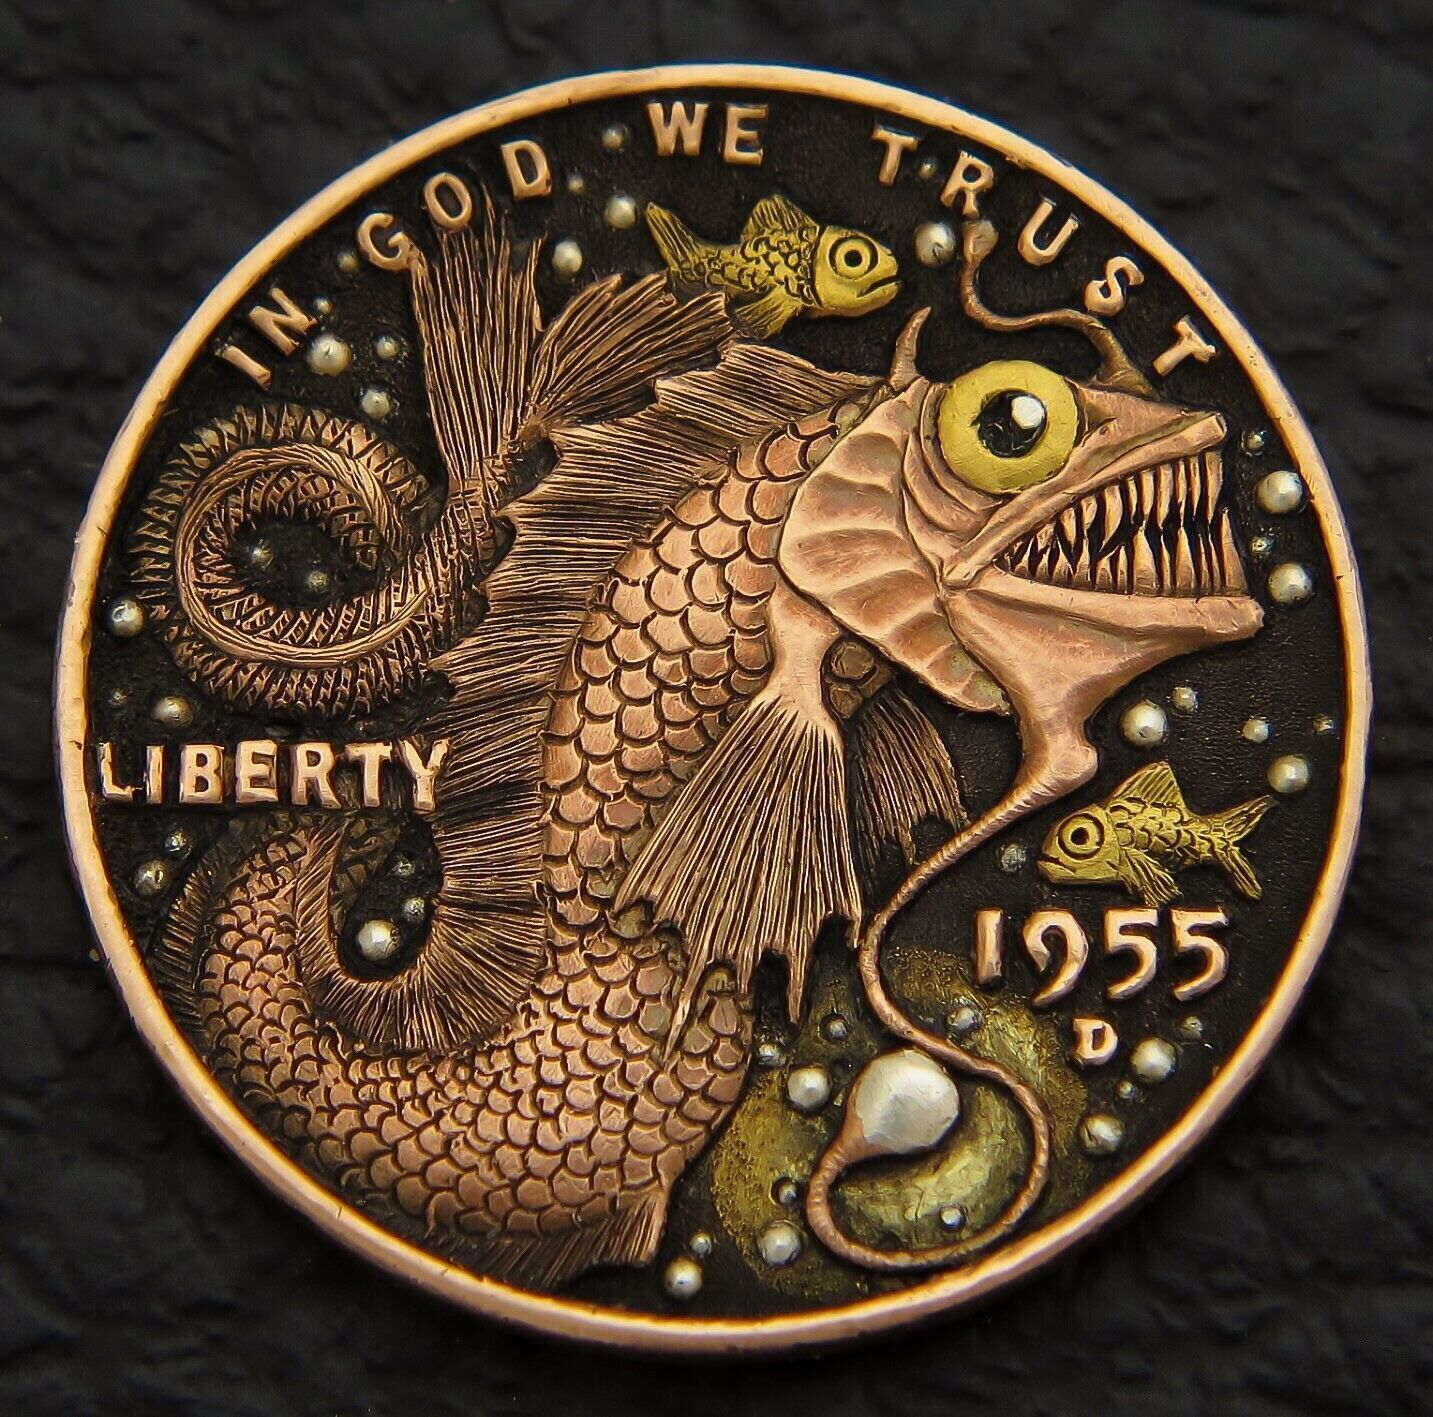 Fish Hand Carved With Inlaid On A Penny | Hobo Nickel, Coin Art, Hobo Art Pertaining To Nickel Metal Wall Art (View 7 of 15)